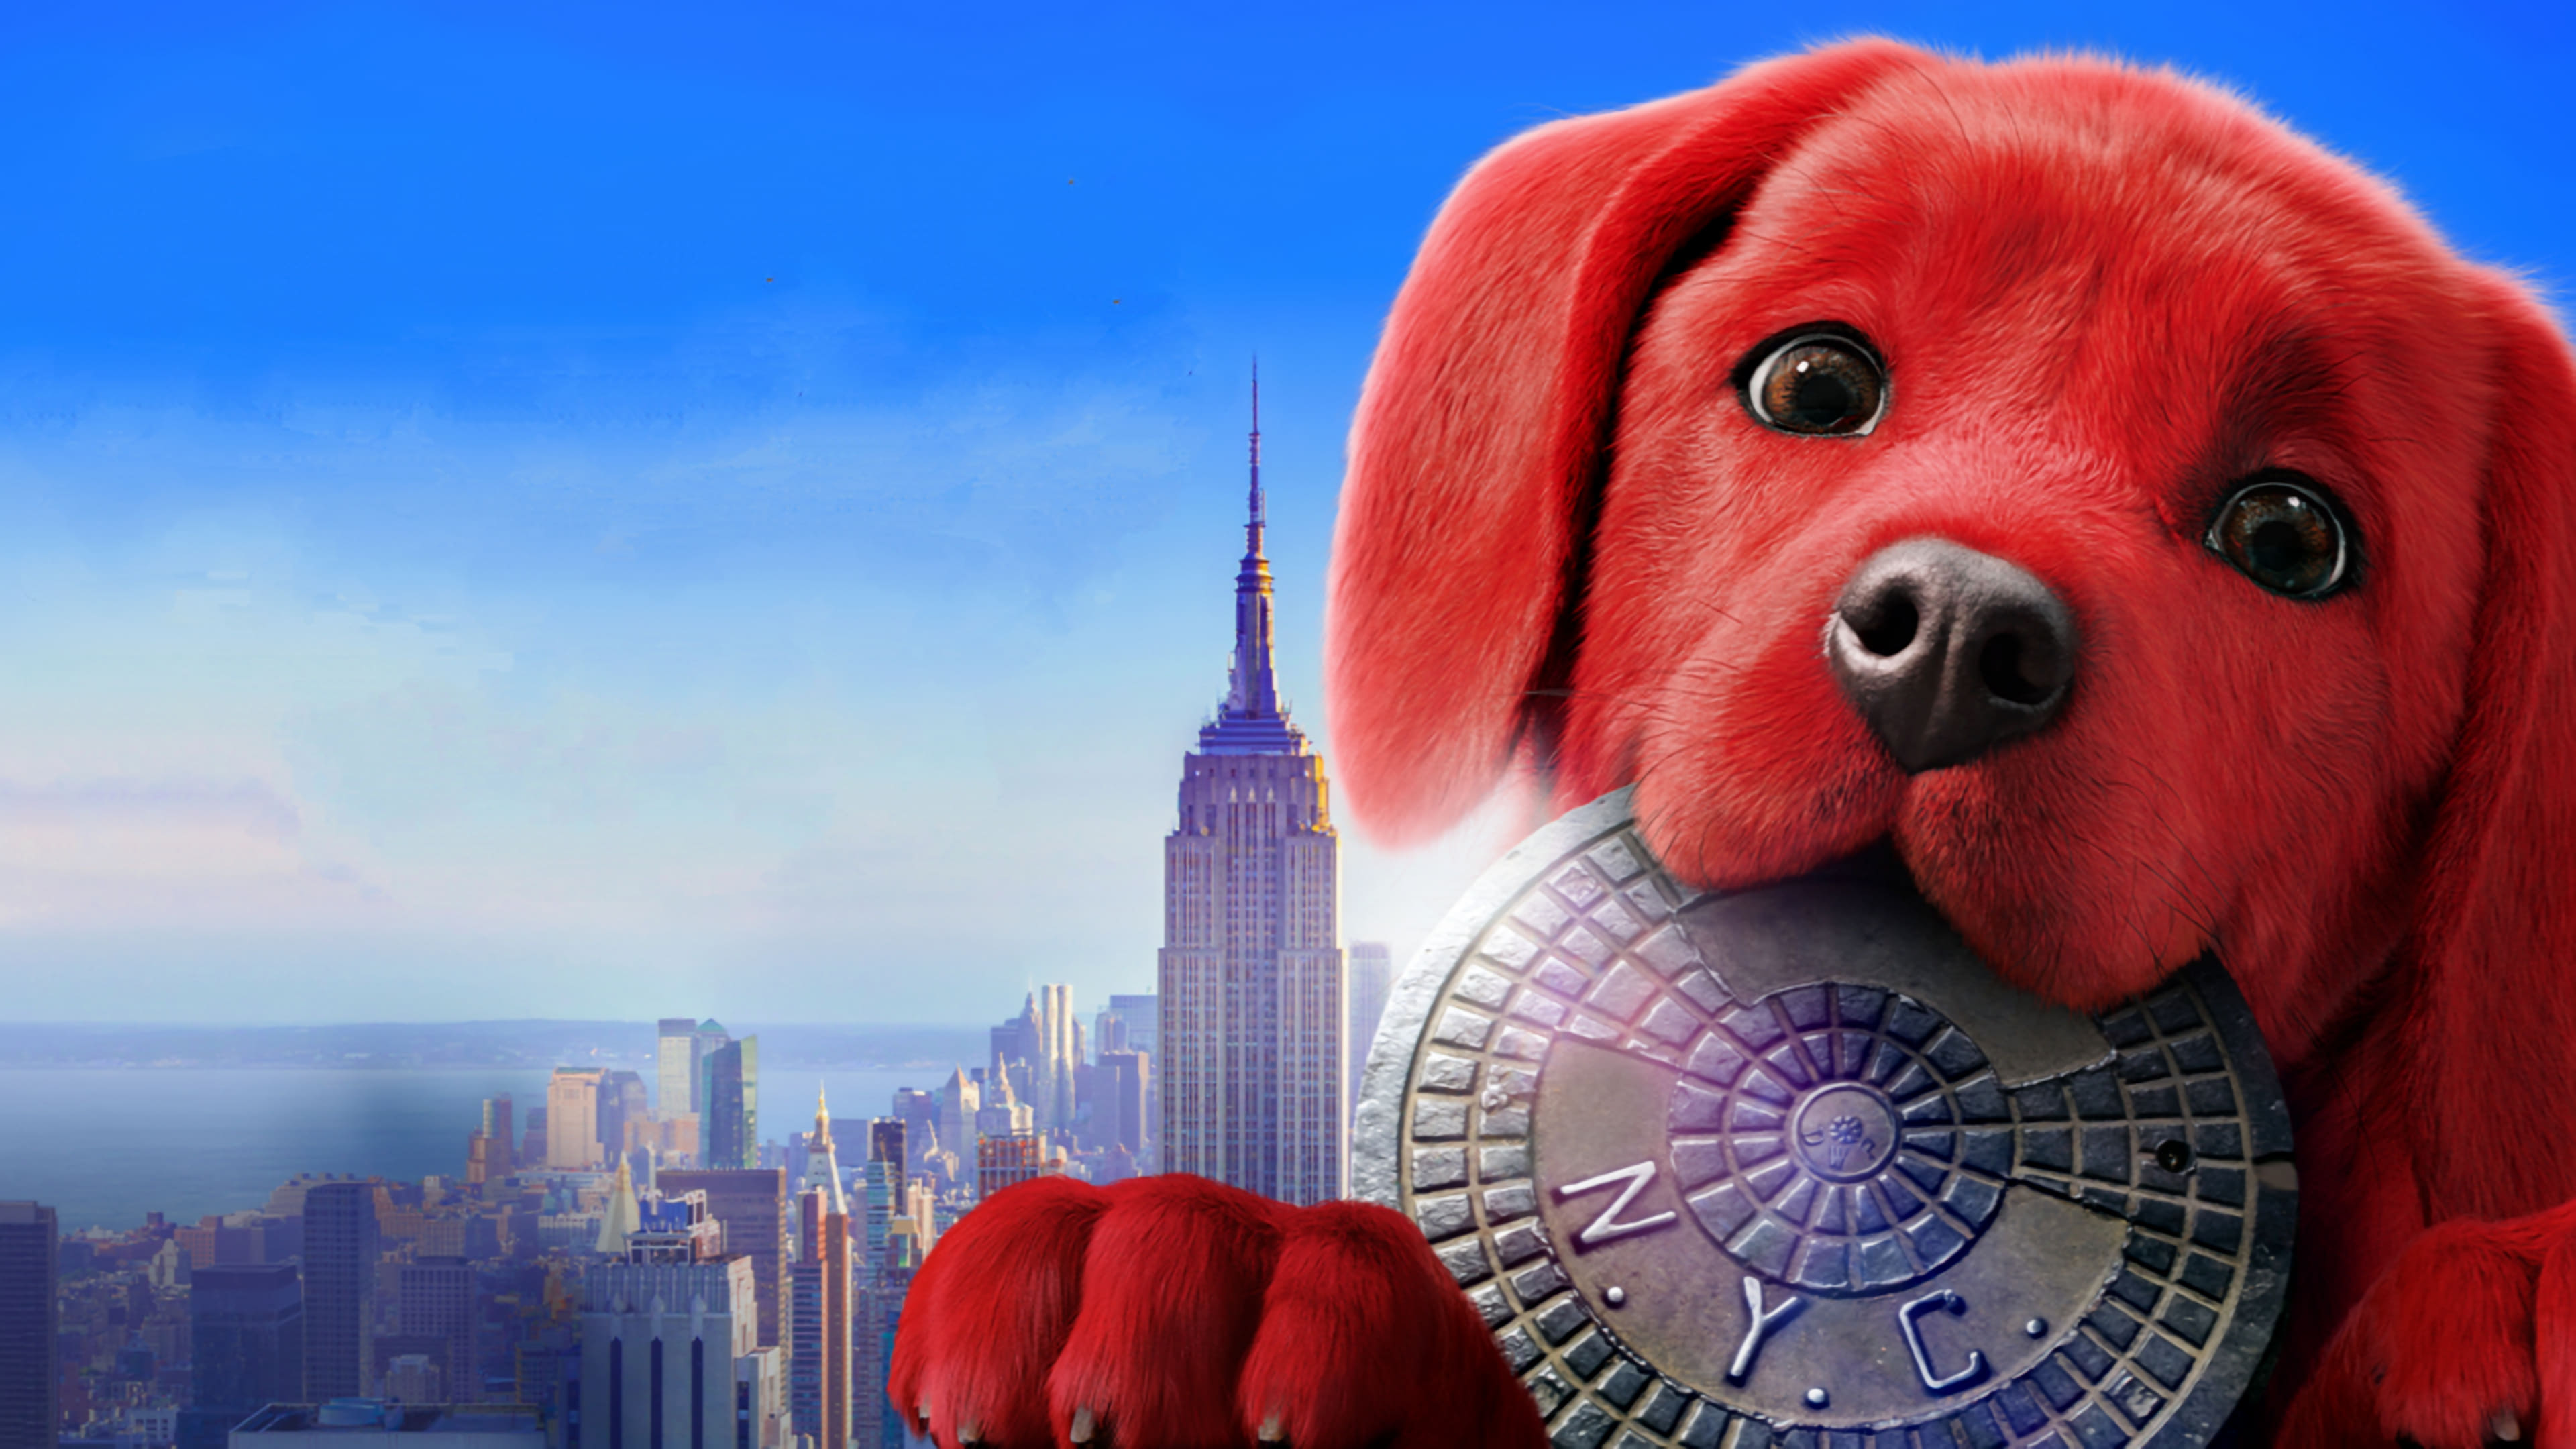 Clifford the Big Red Dog (2021)